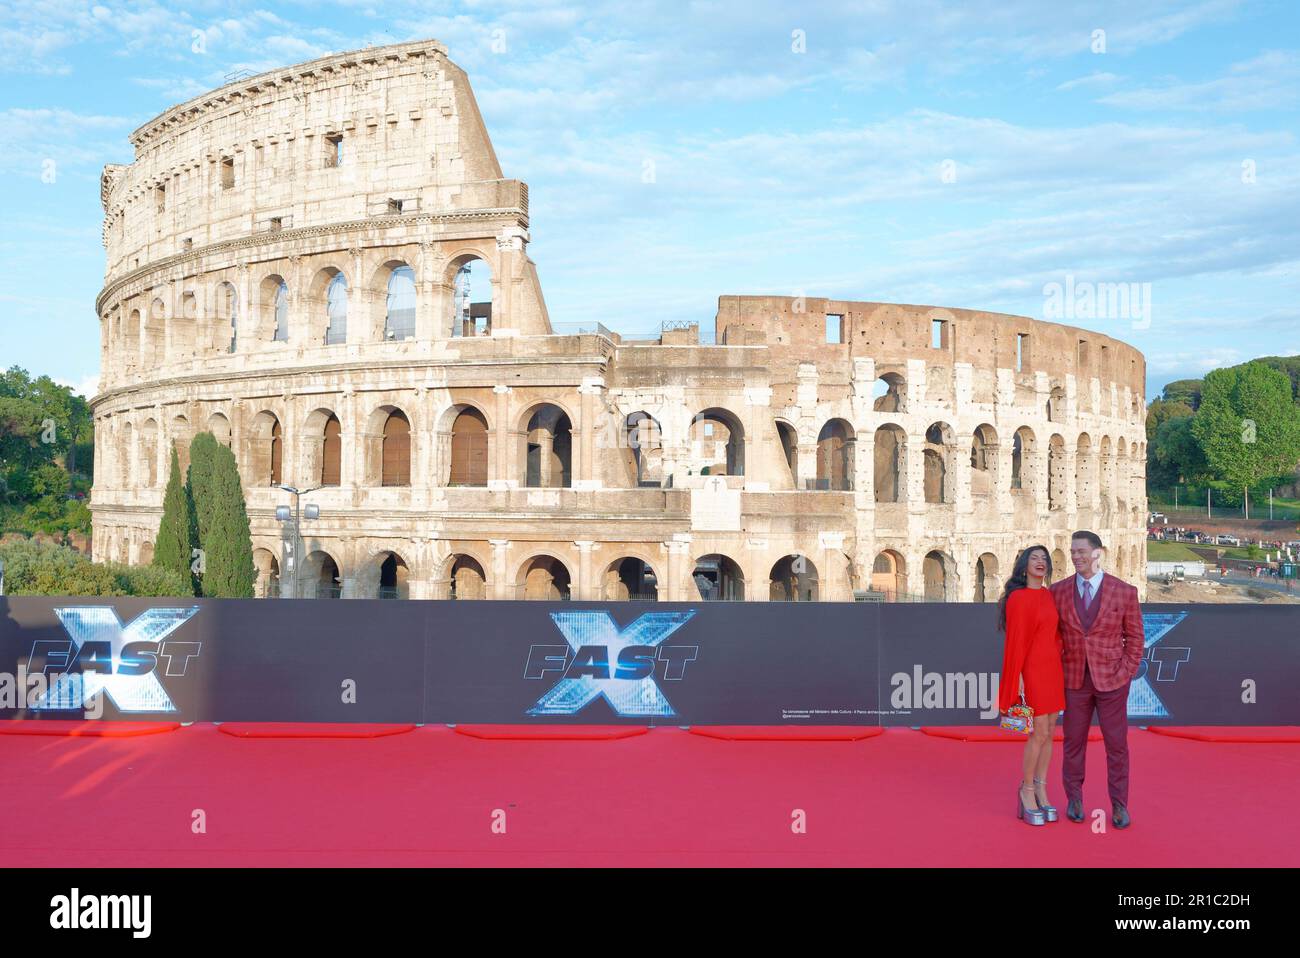 Actor John Cena with wife Shay Shariatzadeh attend the red carpet event for FAST X at the Colosseum, Rome Temple of Venus on May 24, 2023 in Rome, It Stock Photo